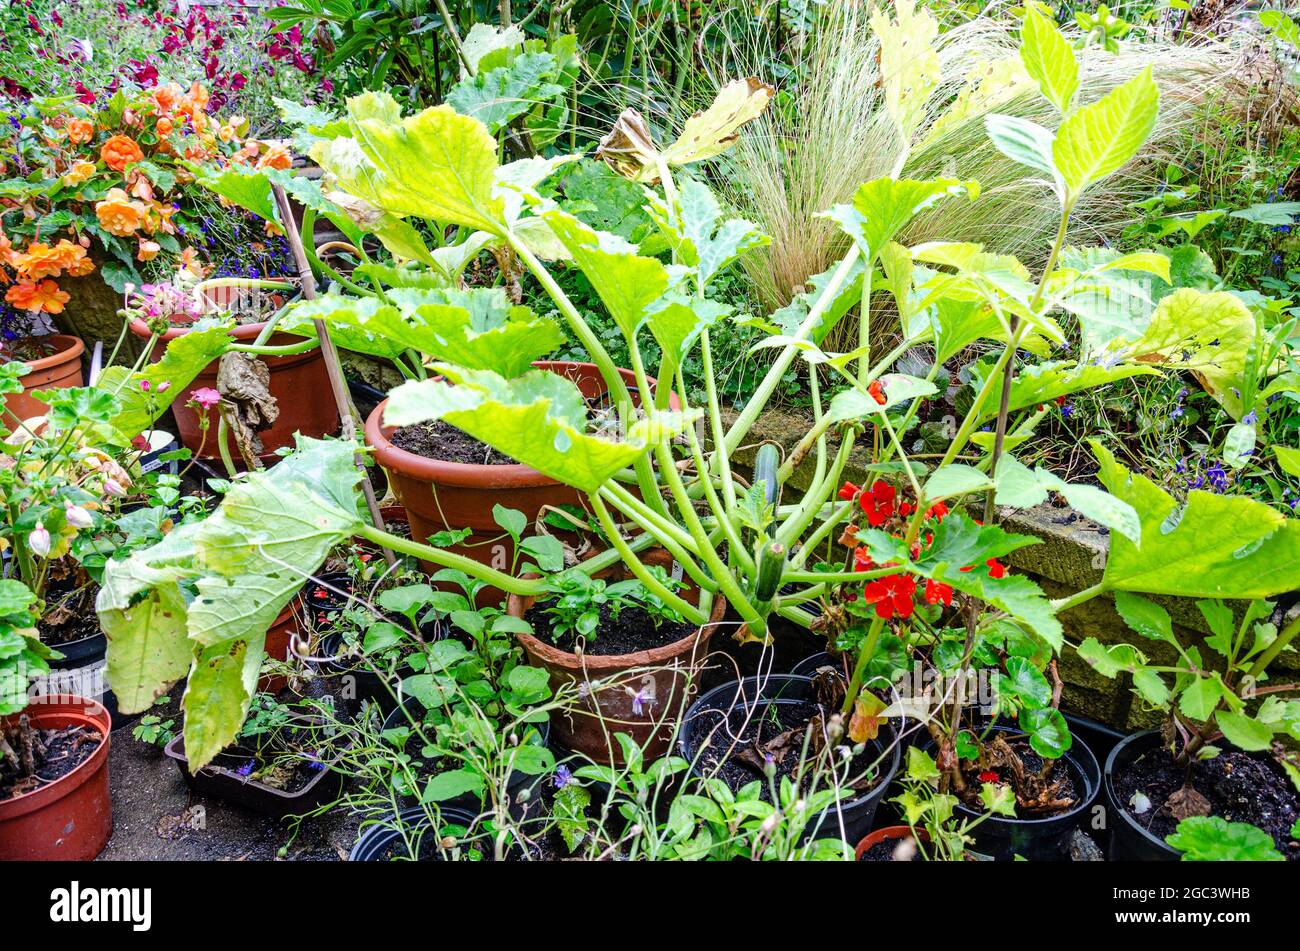 A courgette plant grows in a pot amongst other pot plants on a garden patio. Stock Photo